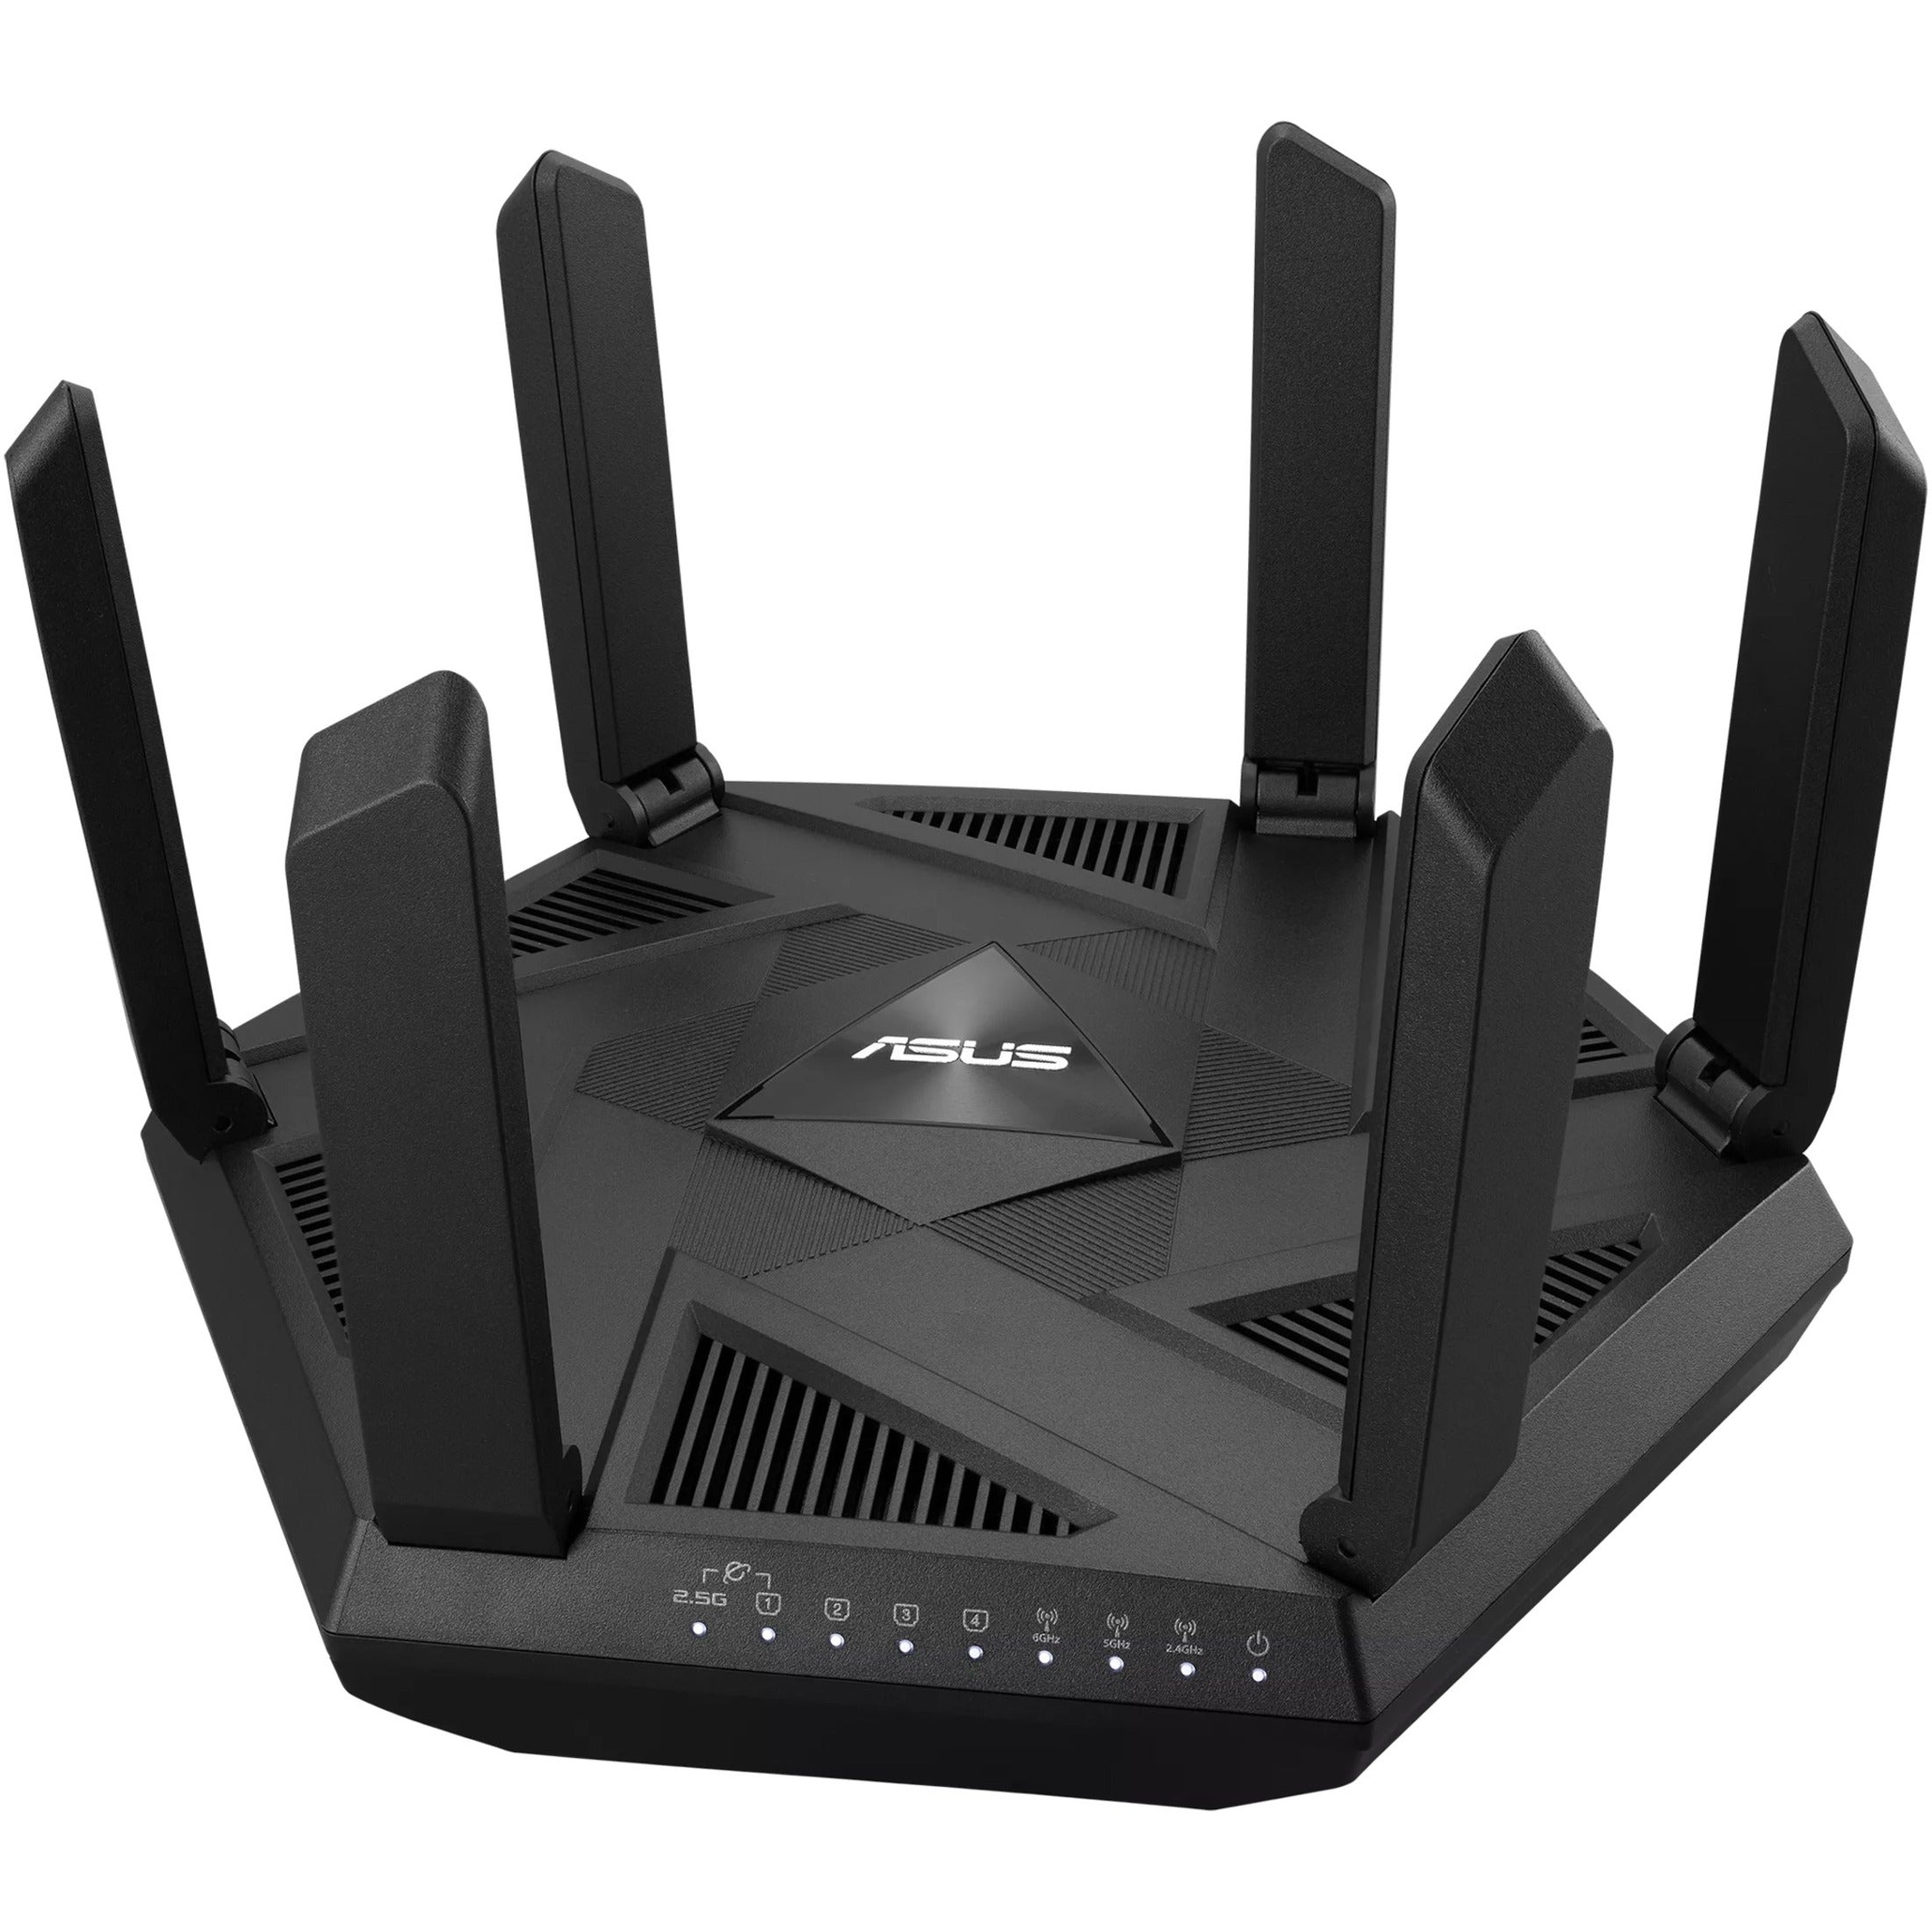 Asus RT-AXE7800 Wi-Fi 6E Wireless Router, Tri Band, 975 MB/s Total Wireless Transmission Speed